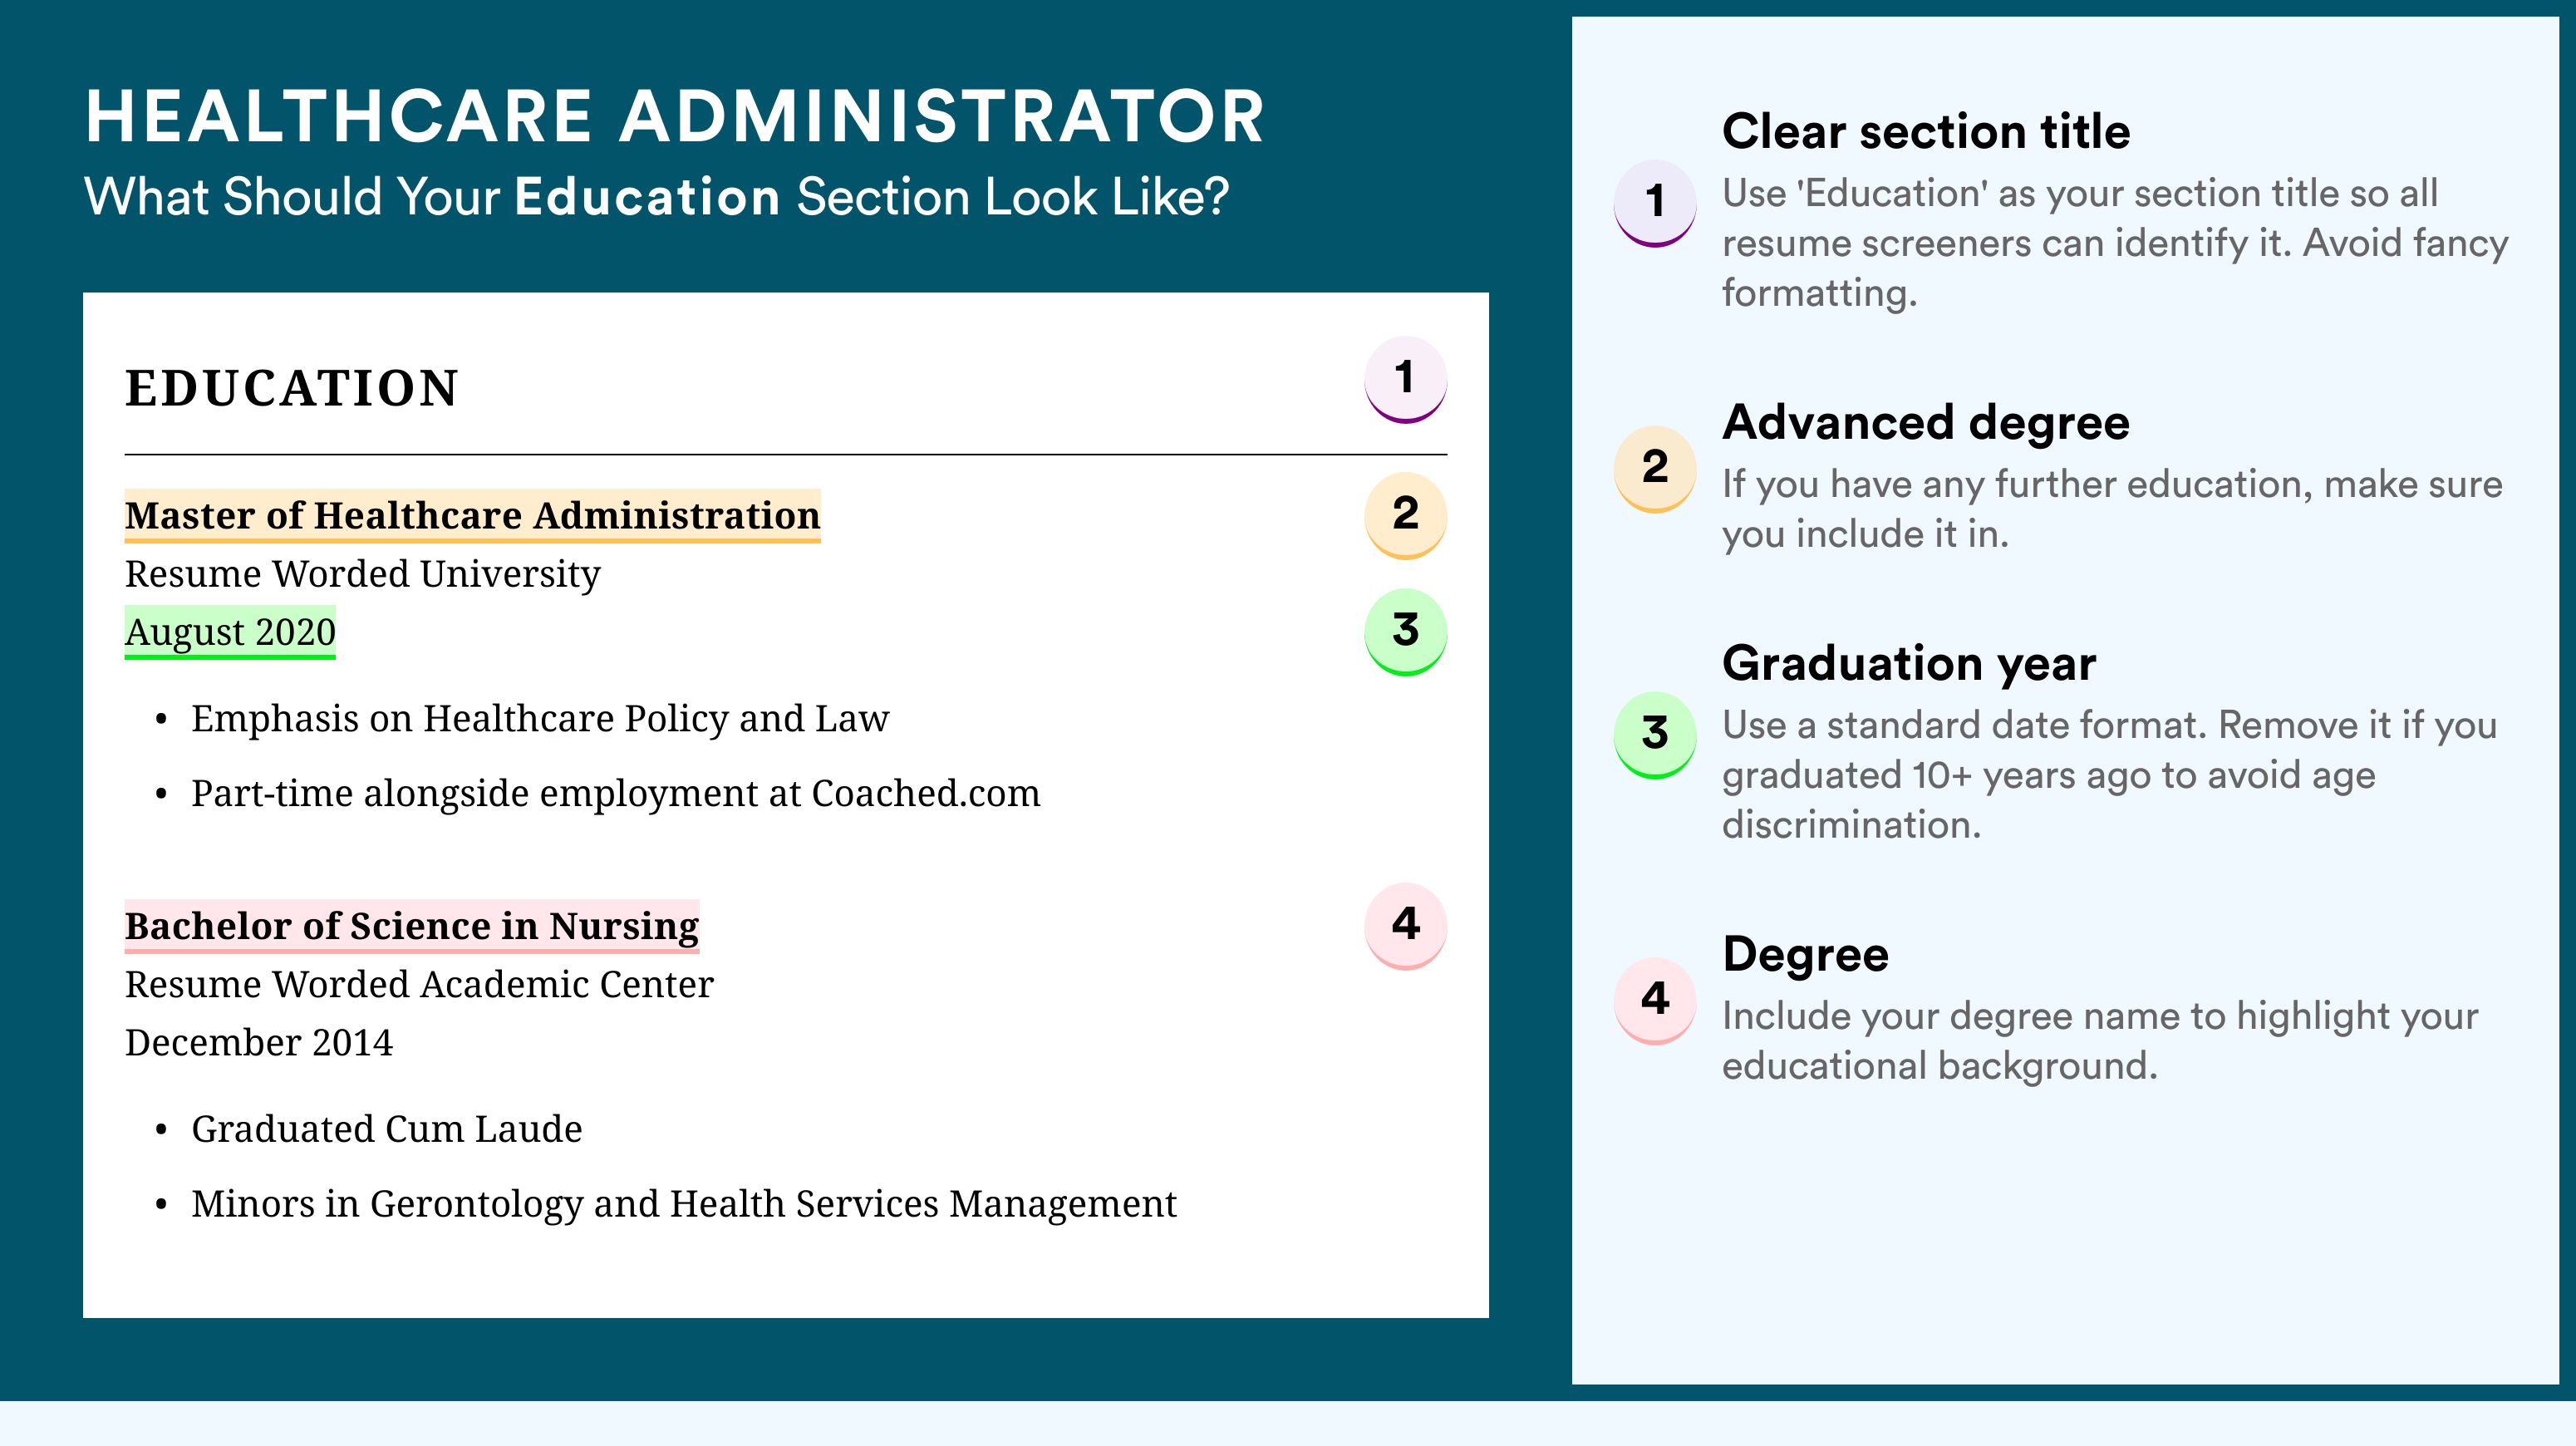 How To Write An Education Section - Healthcare Administrator Roles